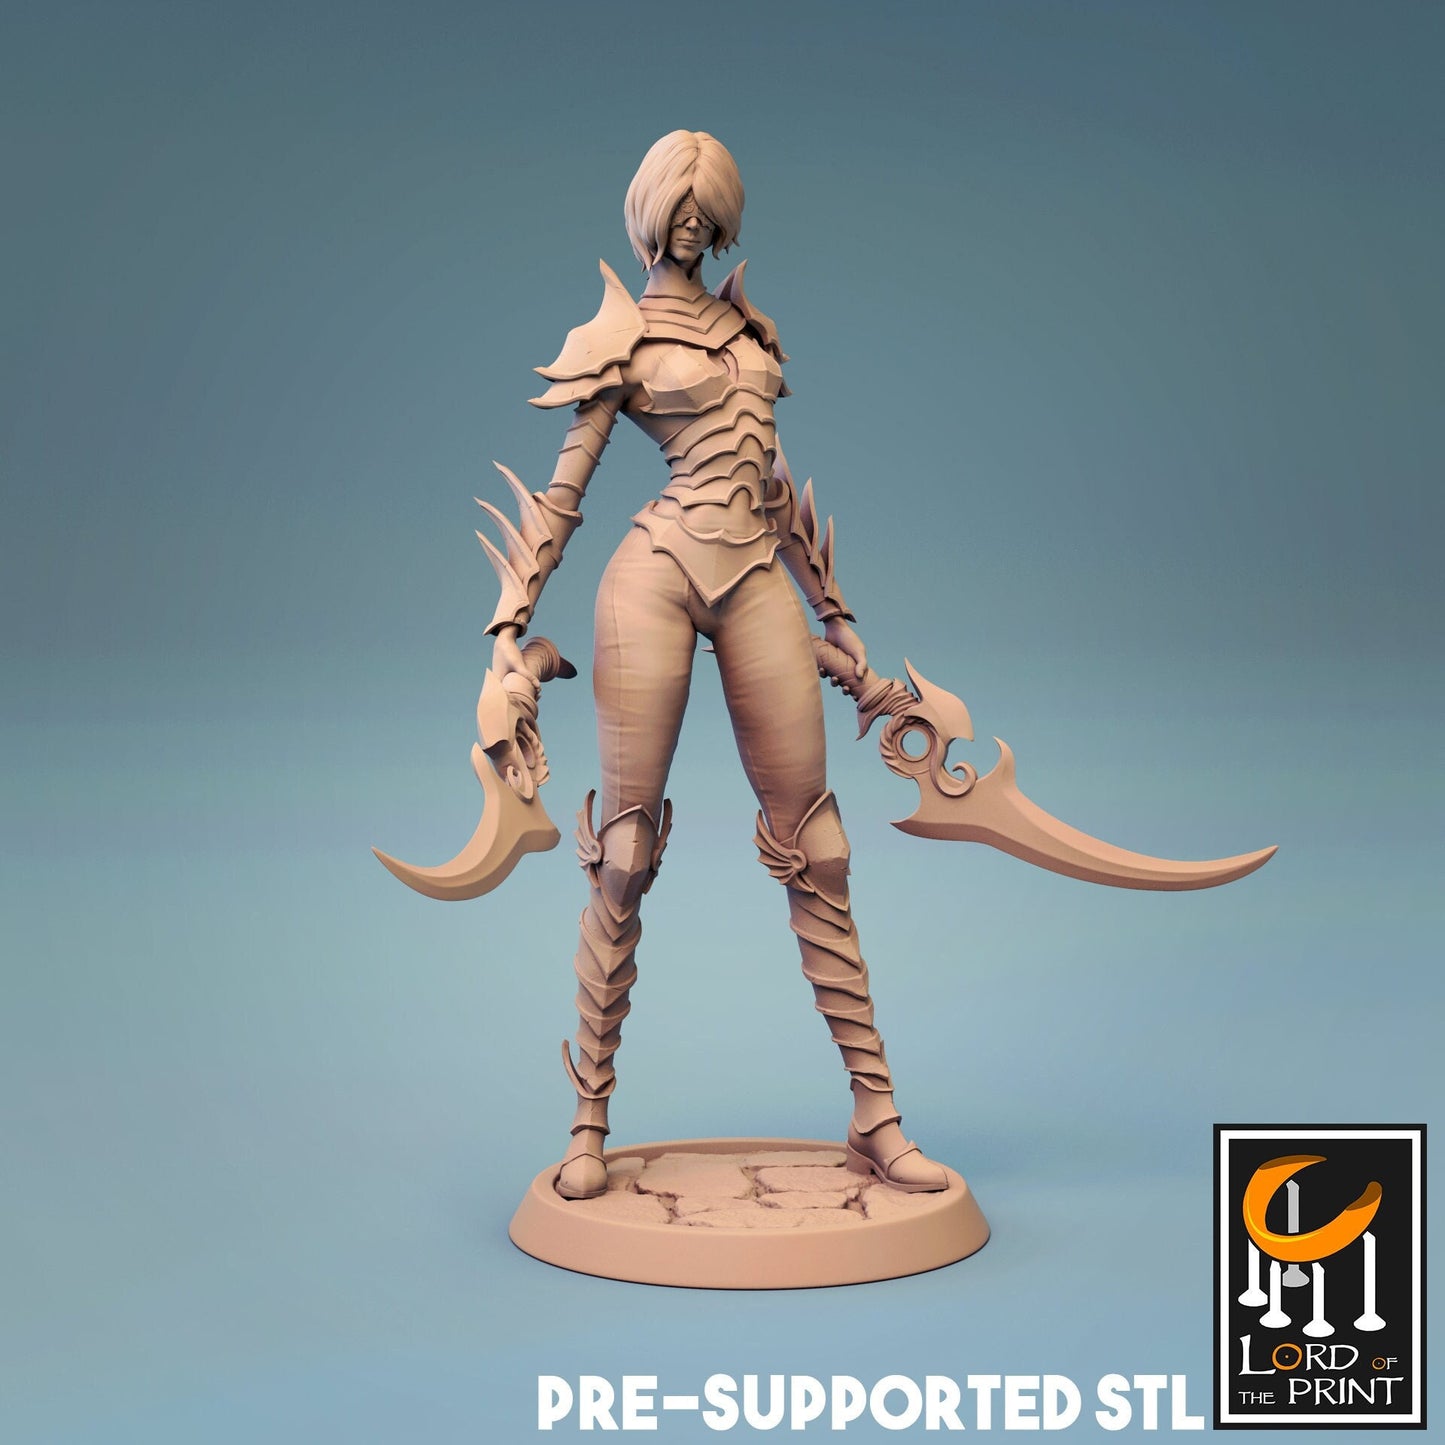 Female Human Rogue with Daggers D&D miniature, by Lord of the Print // 3D Print on Demand / DnD / Pathfinder / RPG